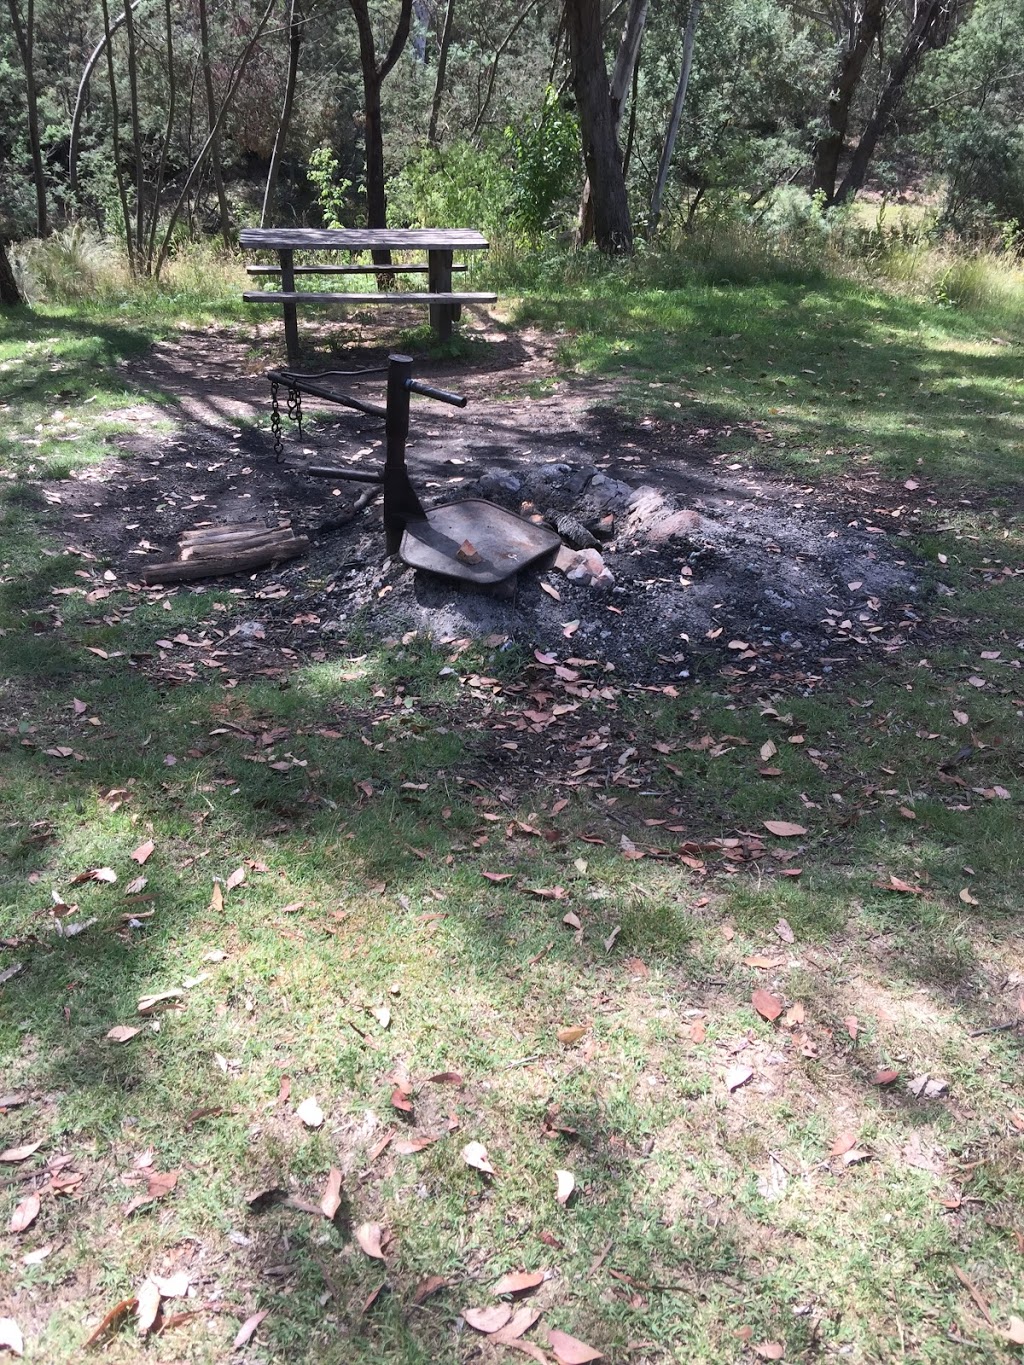 CRB Campground & Toilet | campground | 2855 Omeo Hwy, Anglers Rest VIC 3898, Australia | 131963 OR +61 131963